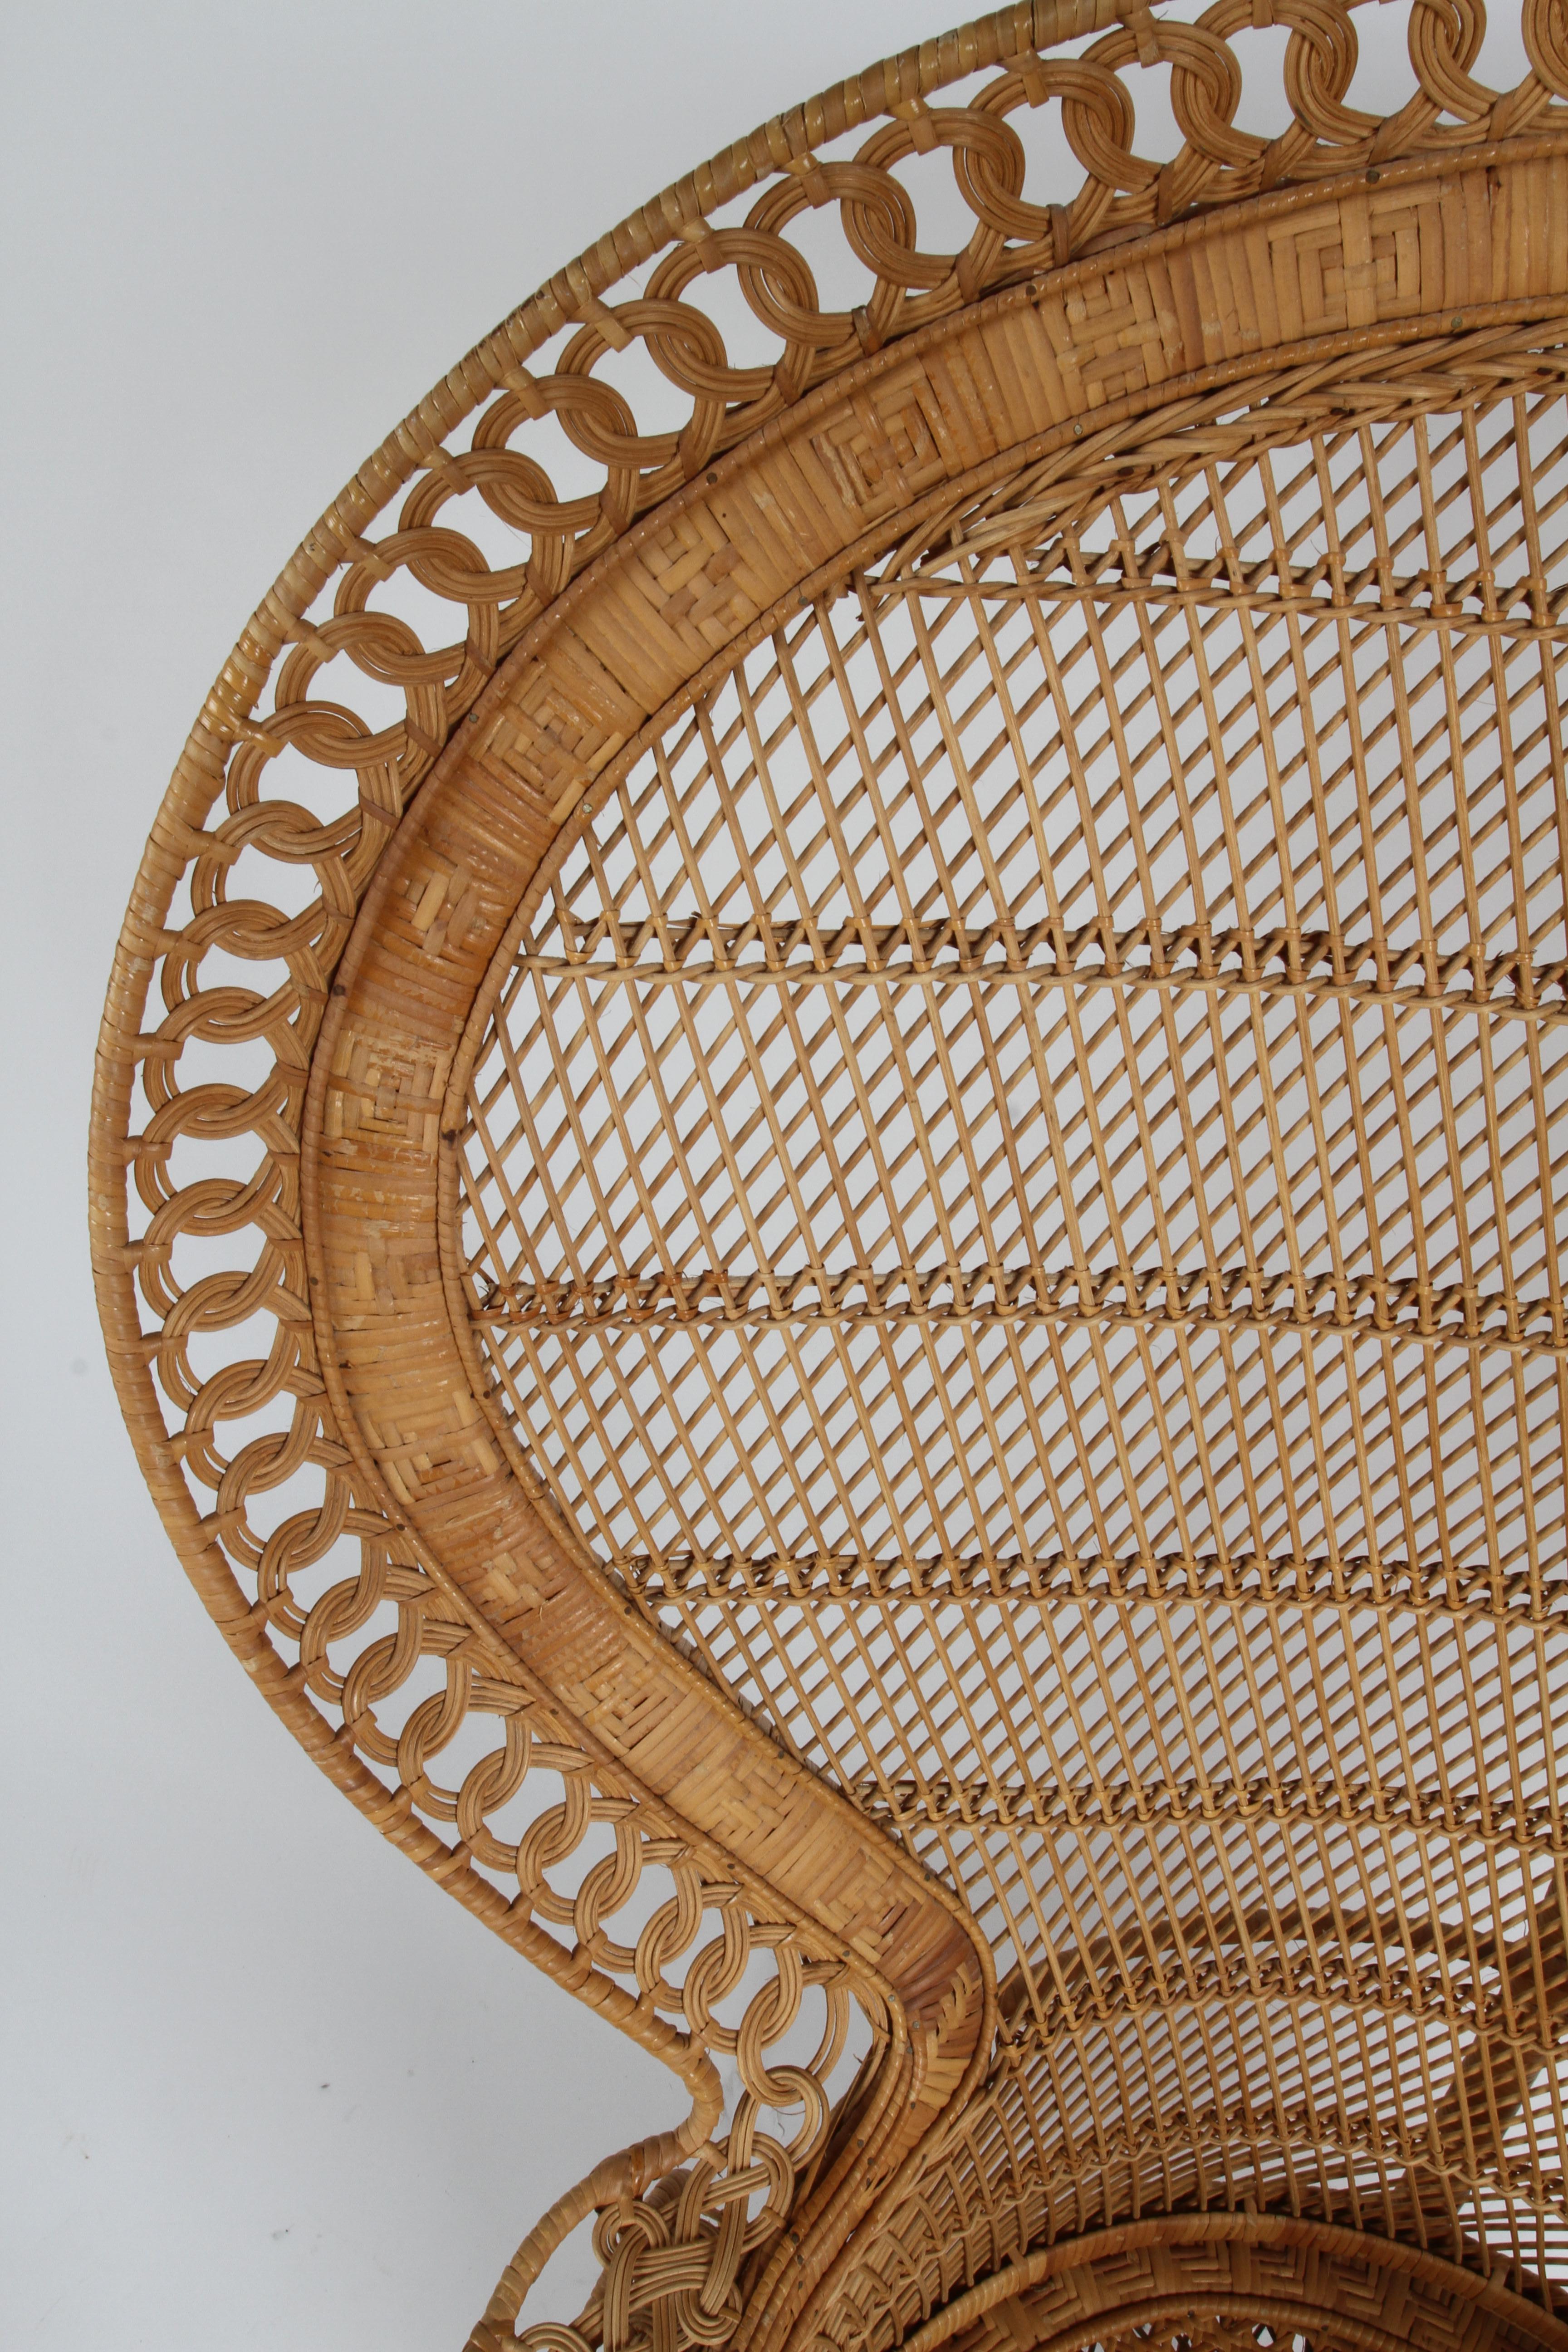 Vintage 1970s Rattan & Wicker Handcrafted Boho Chic Emmanuelle Peacock Chair In Good Condition For Sale In St. Louis, MO